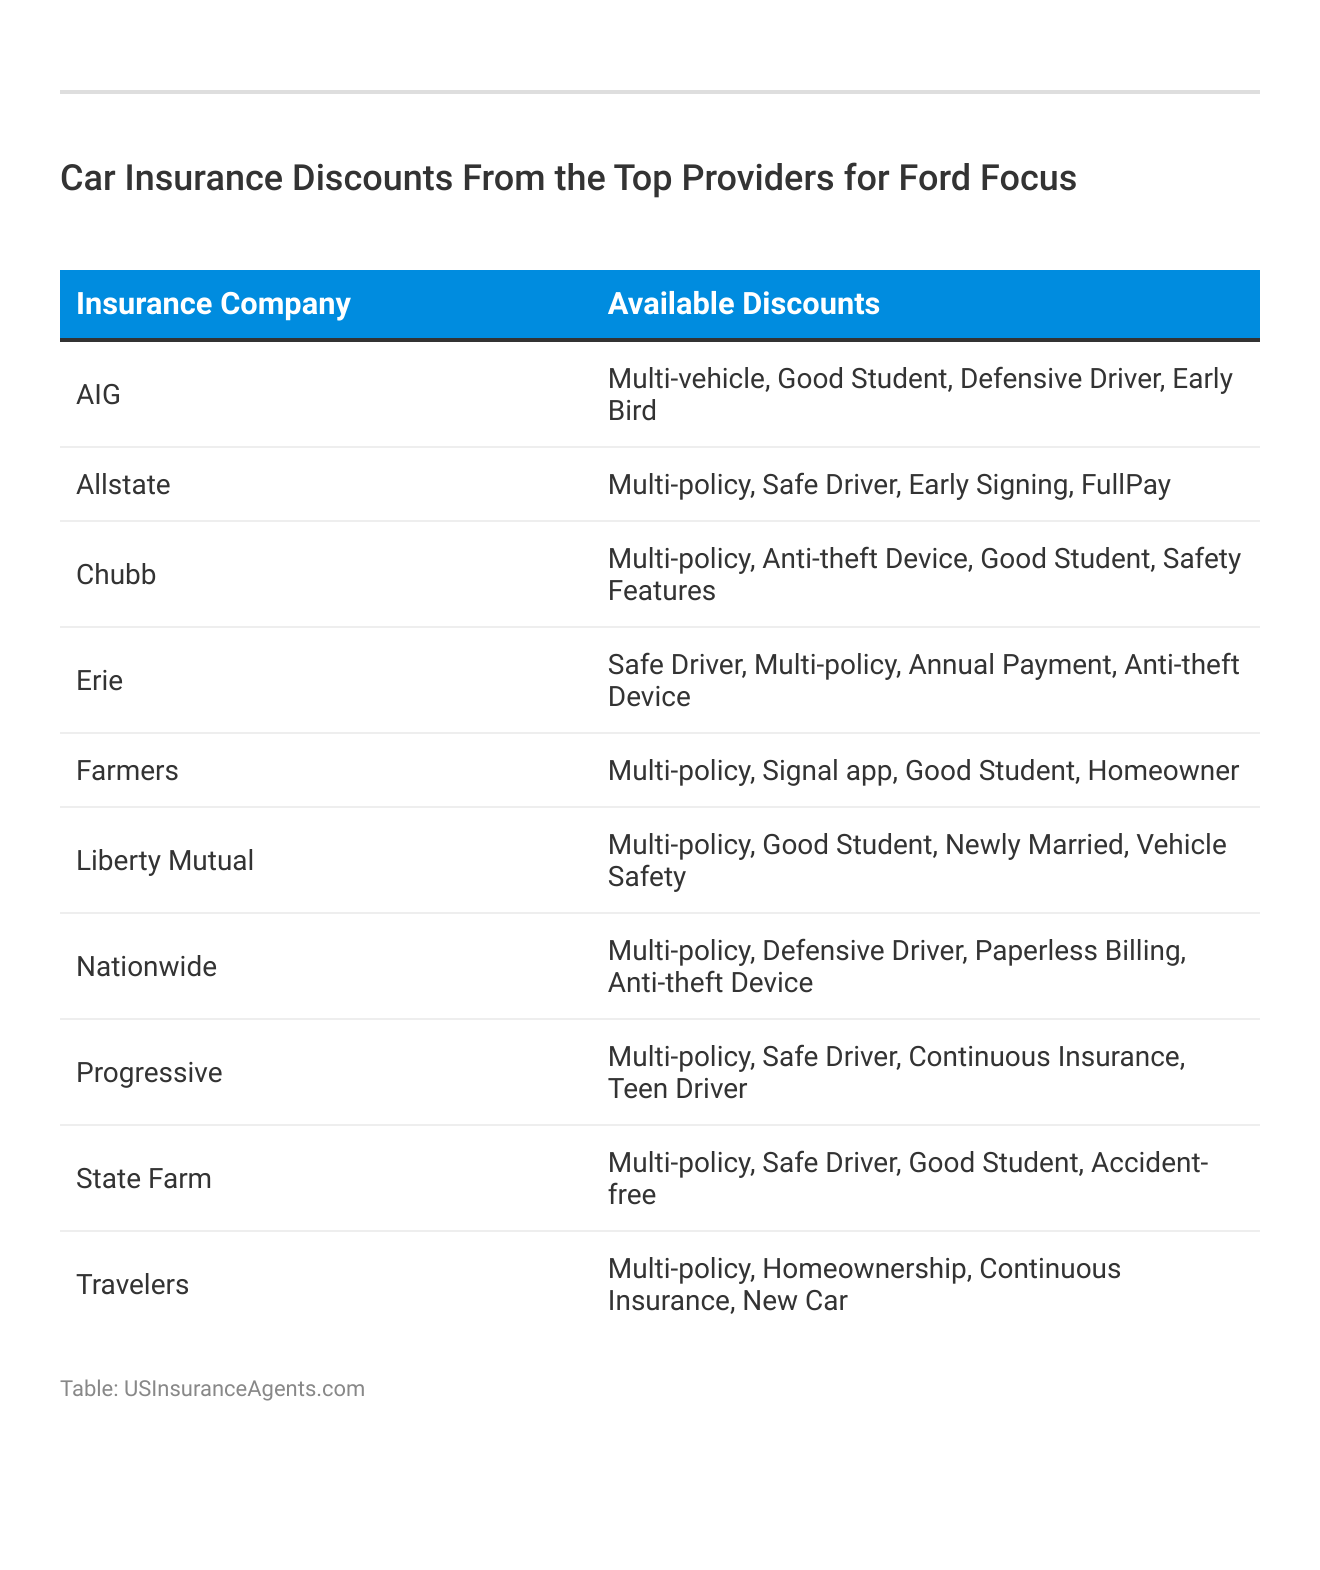 <h3>Car Insurance Discounts From the Top Providers for Ford Focus</h3>